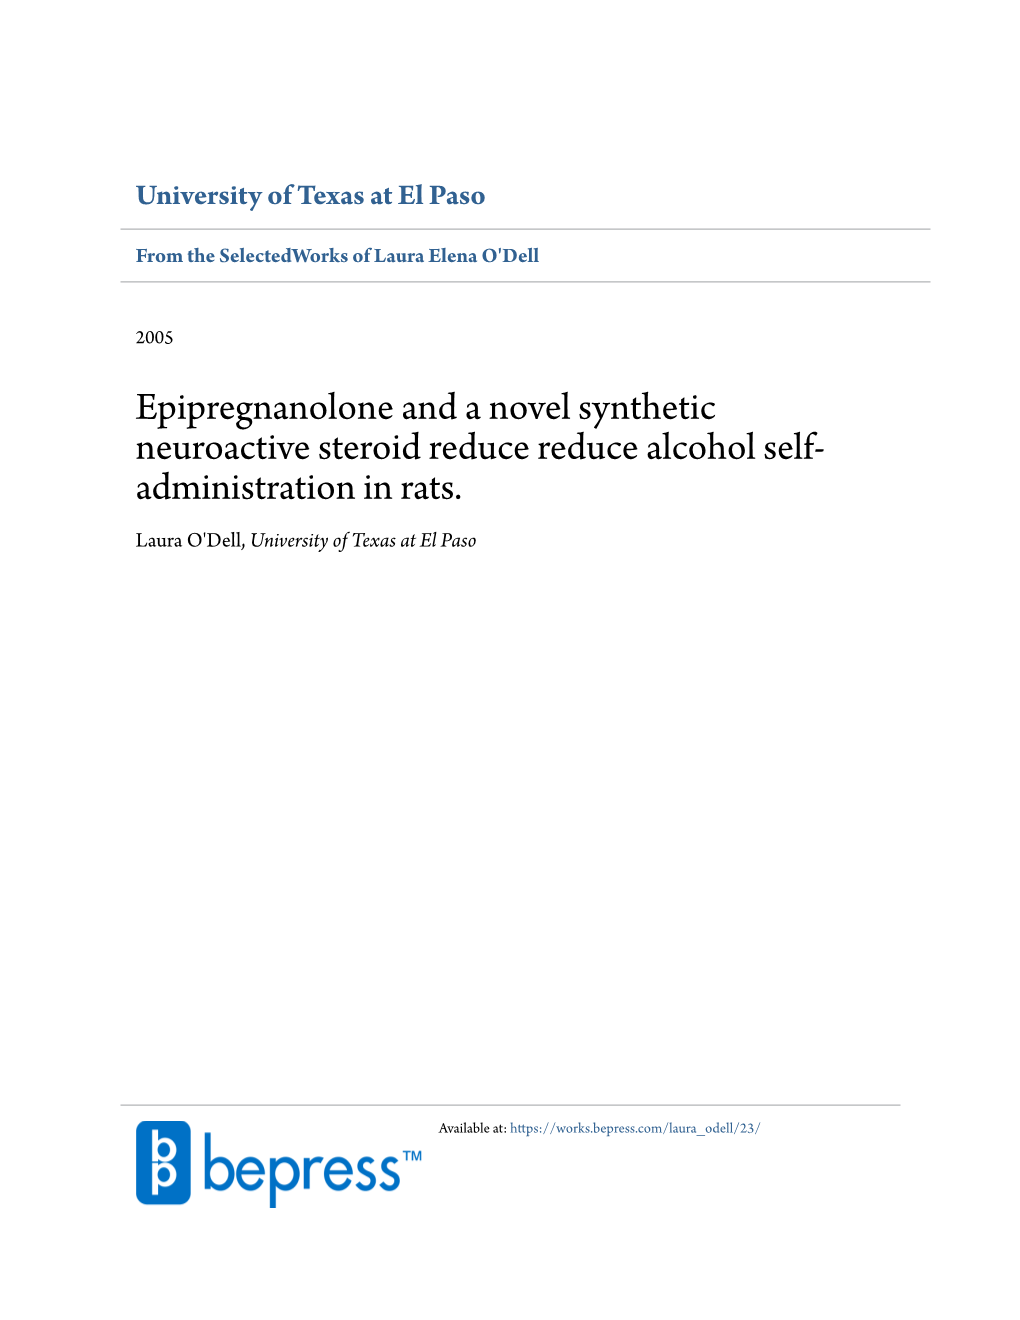 Epipregnanolone and a Novel Synthetic Neuroactive Steroid Reduce Reduce Alcohol Self- Administration in Rats